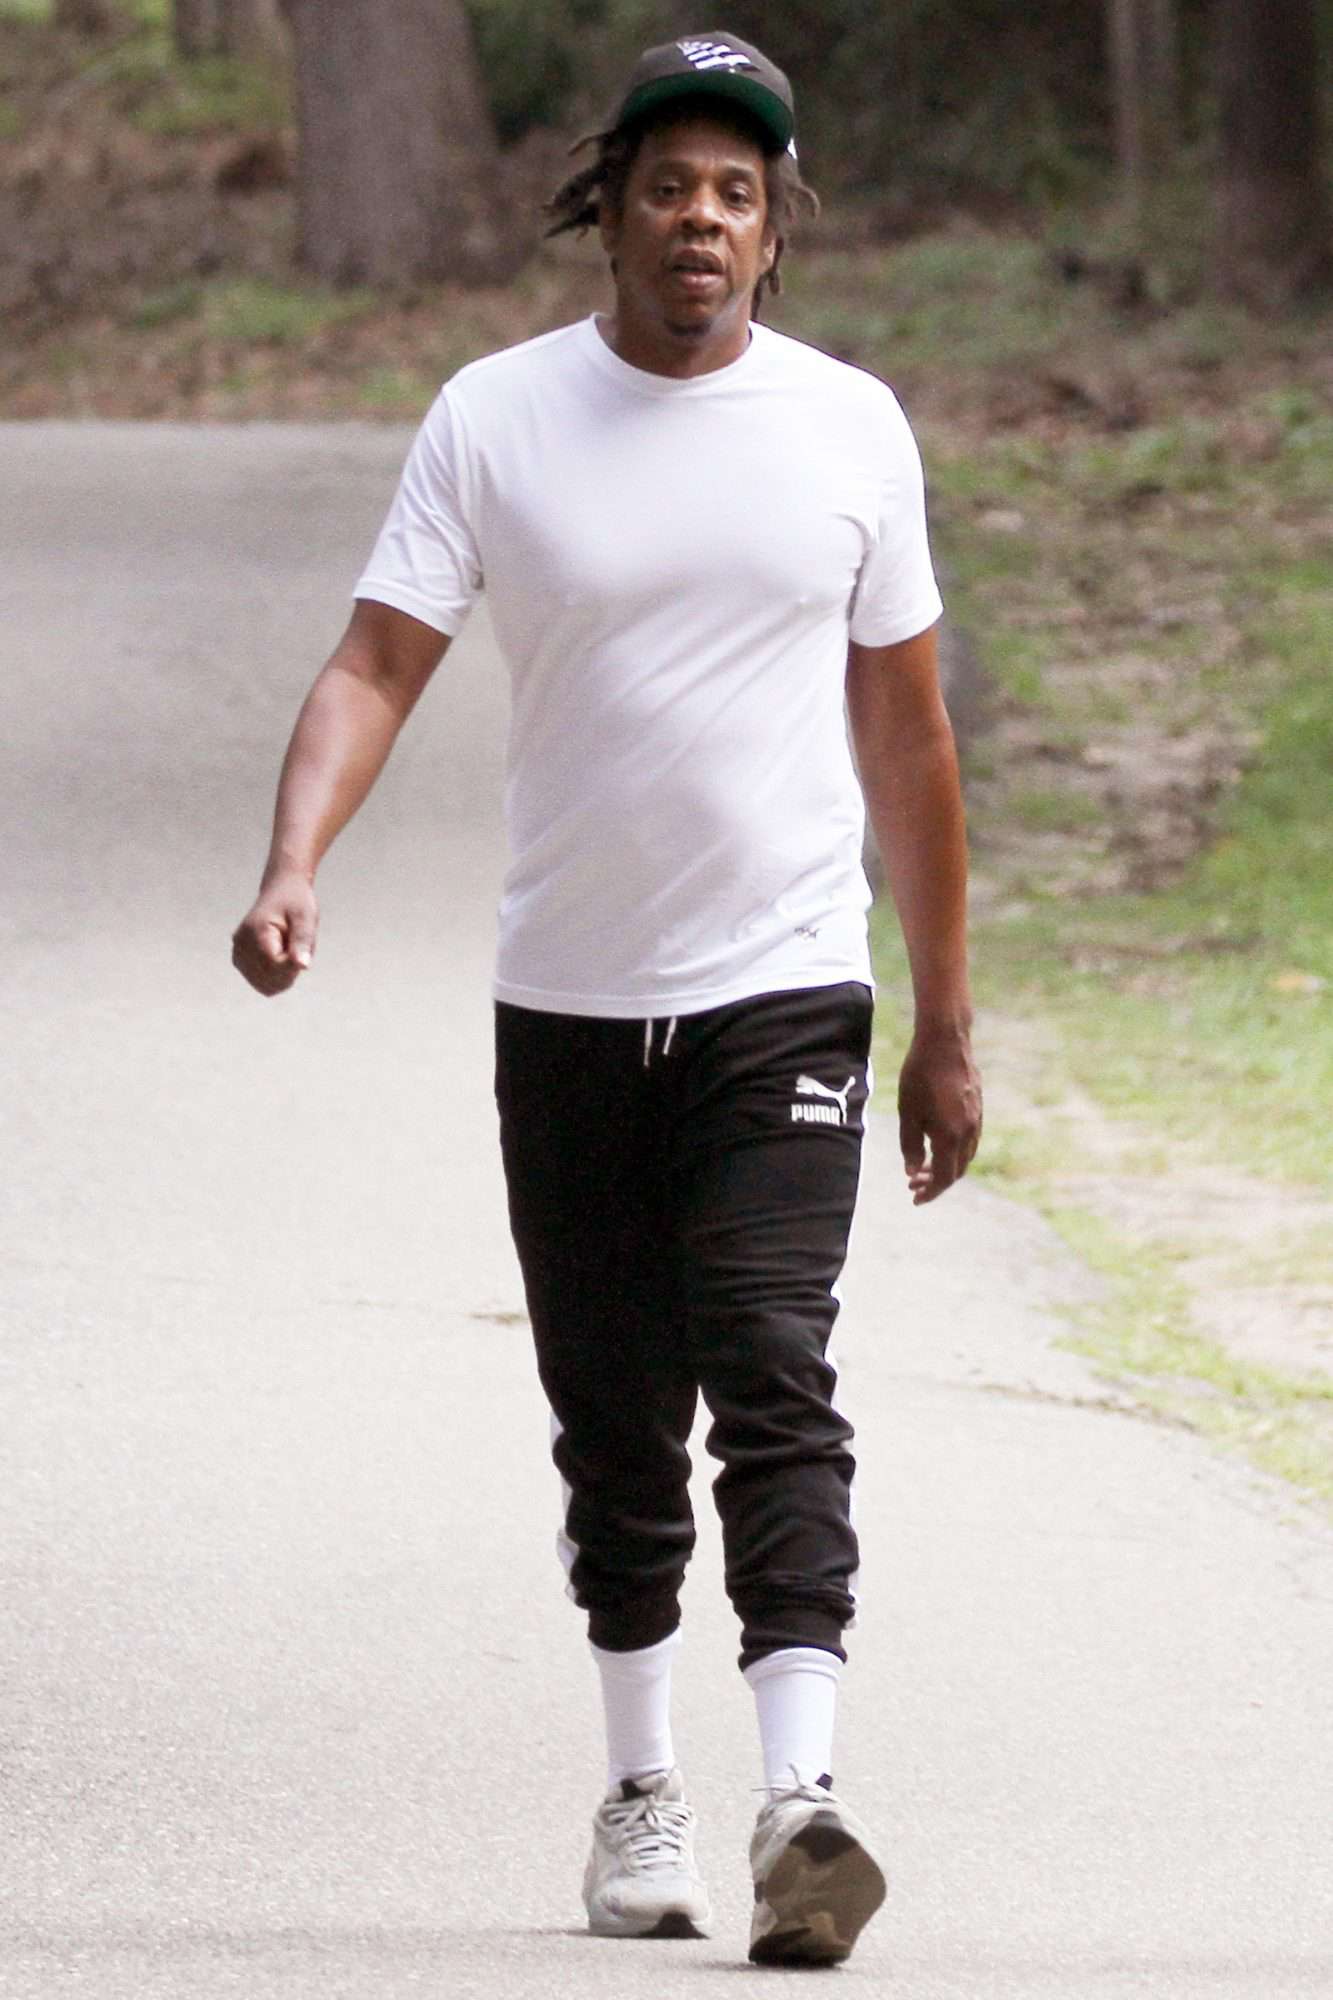 Jay Z Spotted Out For A Jog In Southampton New York With His Bodyguard